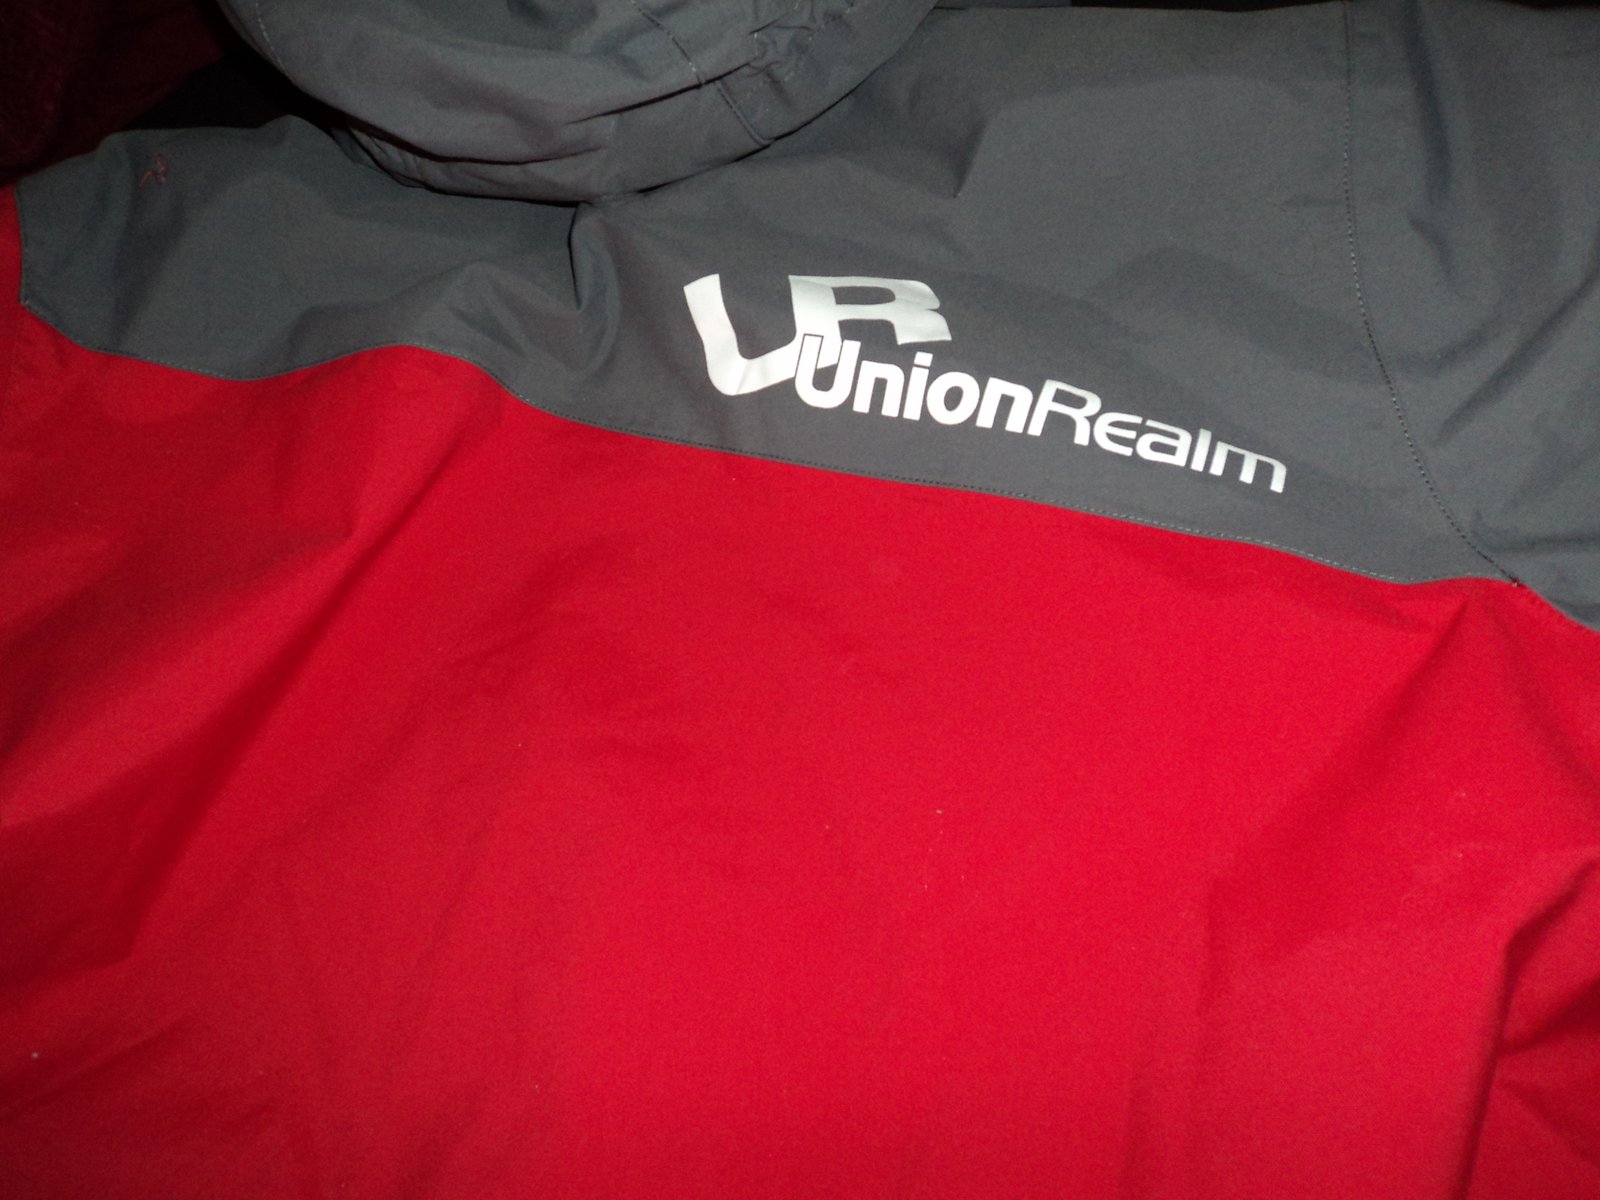 Union Realm Outerwear